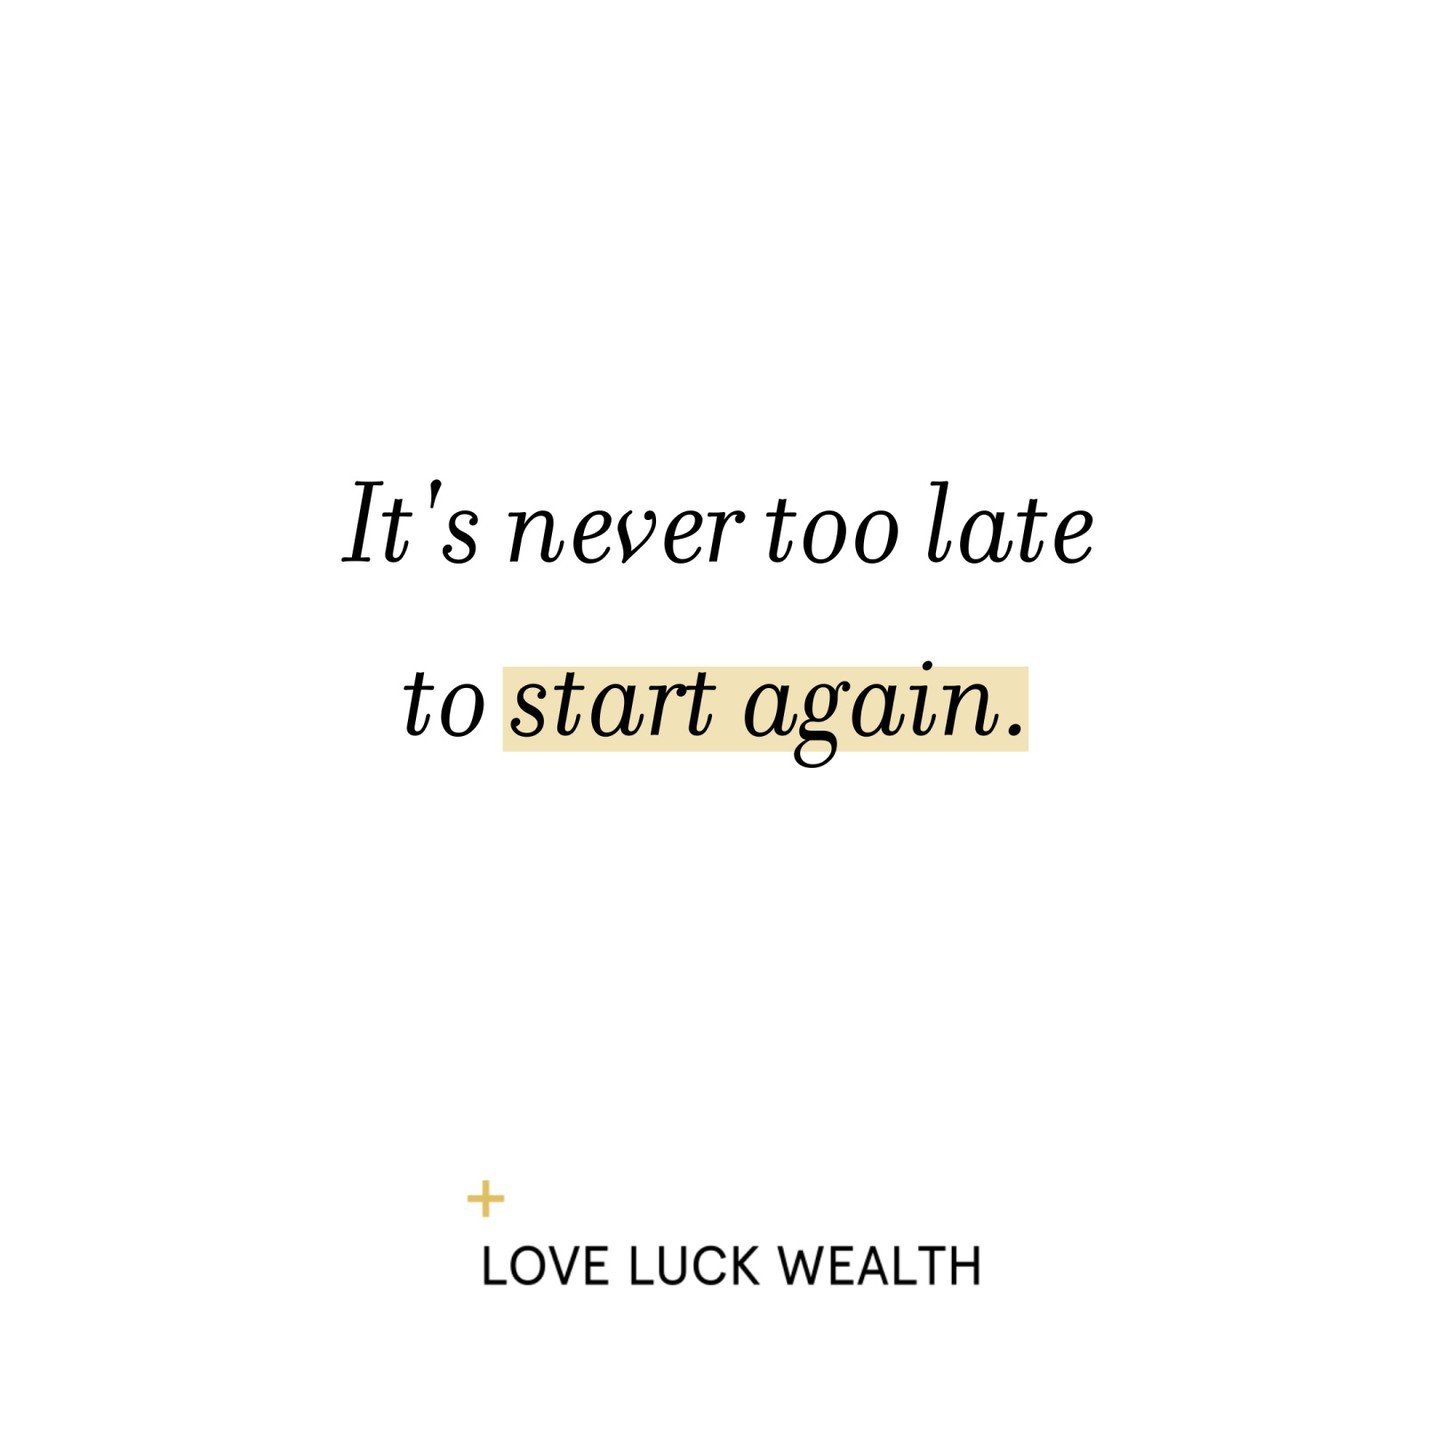 If you're not where you want to be financially, please know that it's never too late to start again.

But first, you'll need to decide on what you want. I mean what you really want, from your heart.

I know what you&rsquo;re thinking, 'but there's no